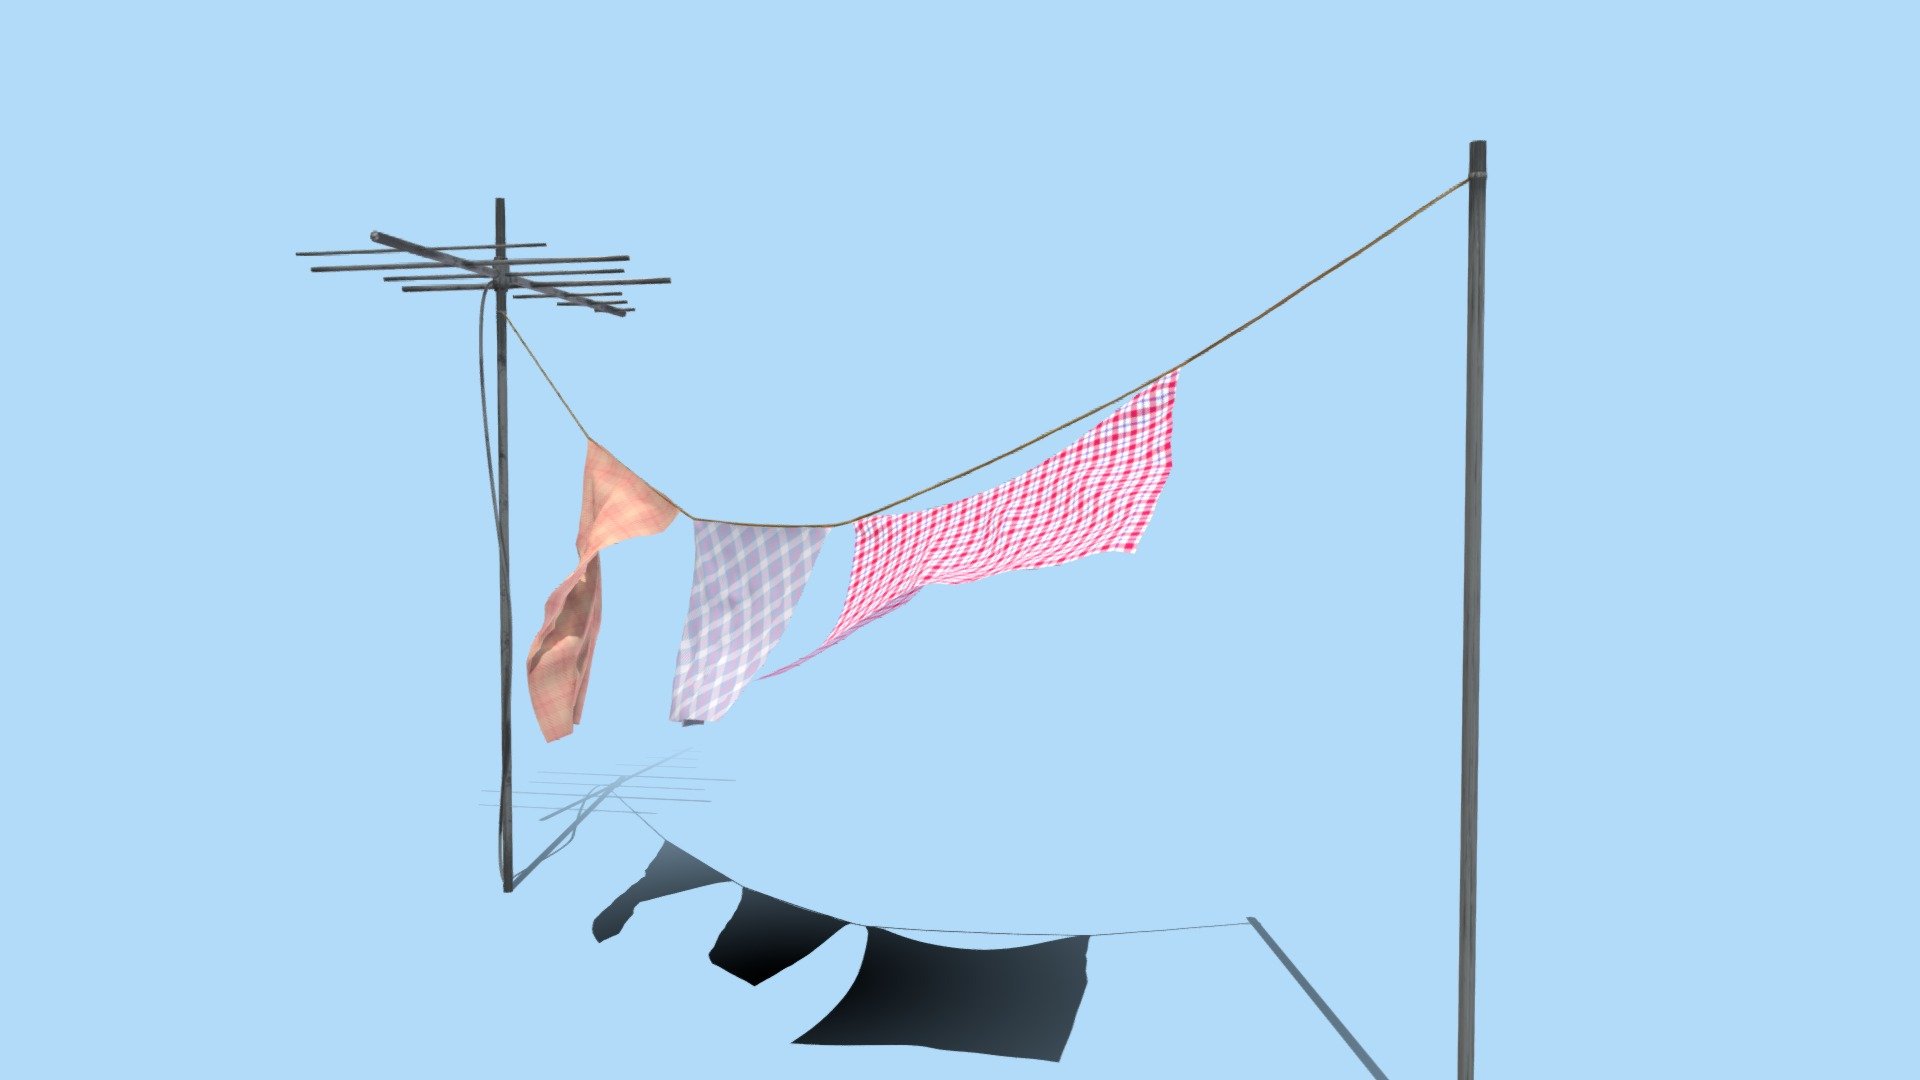 Spreading sheets in wind animation
Adding a subdiv to the sheets will look better too
Time for laundry babes 😁✌ - Laundry - Spreading Sheets (animated) - Buy Royalty Free 3D model by ahingel 3d model